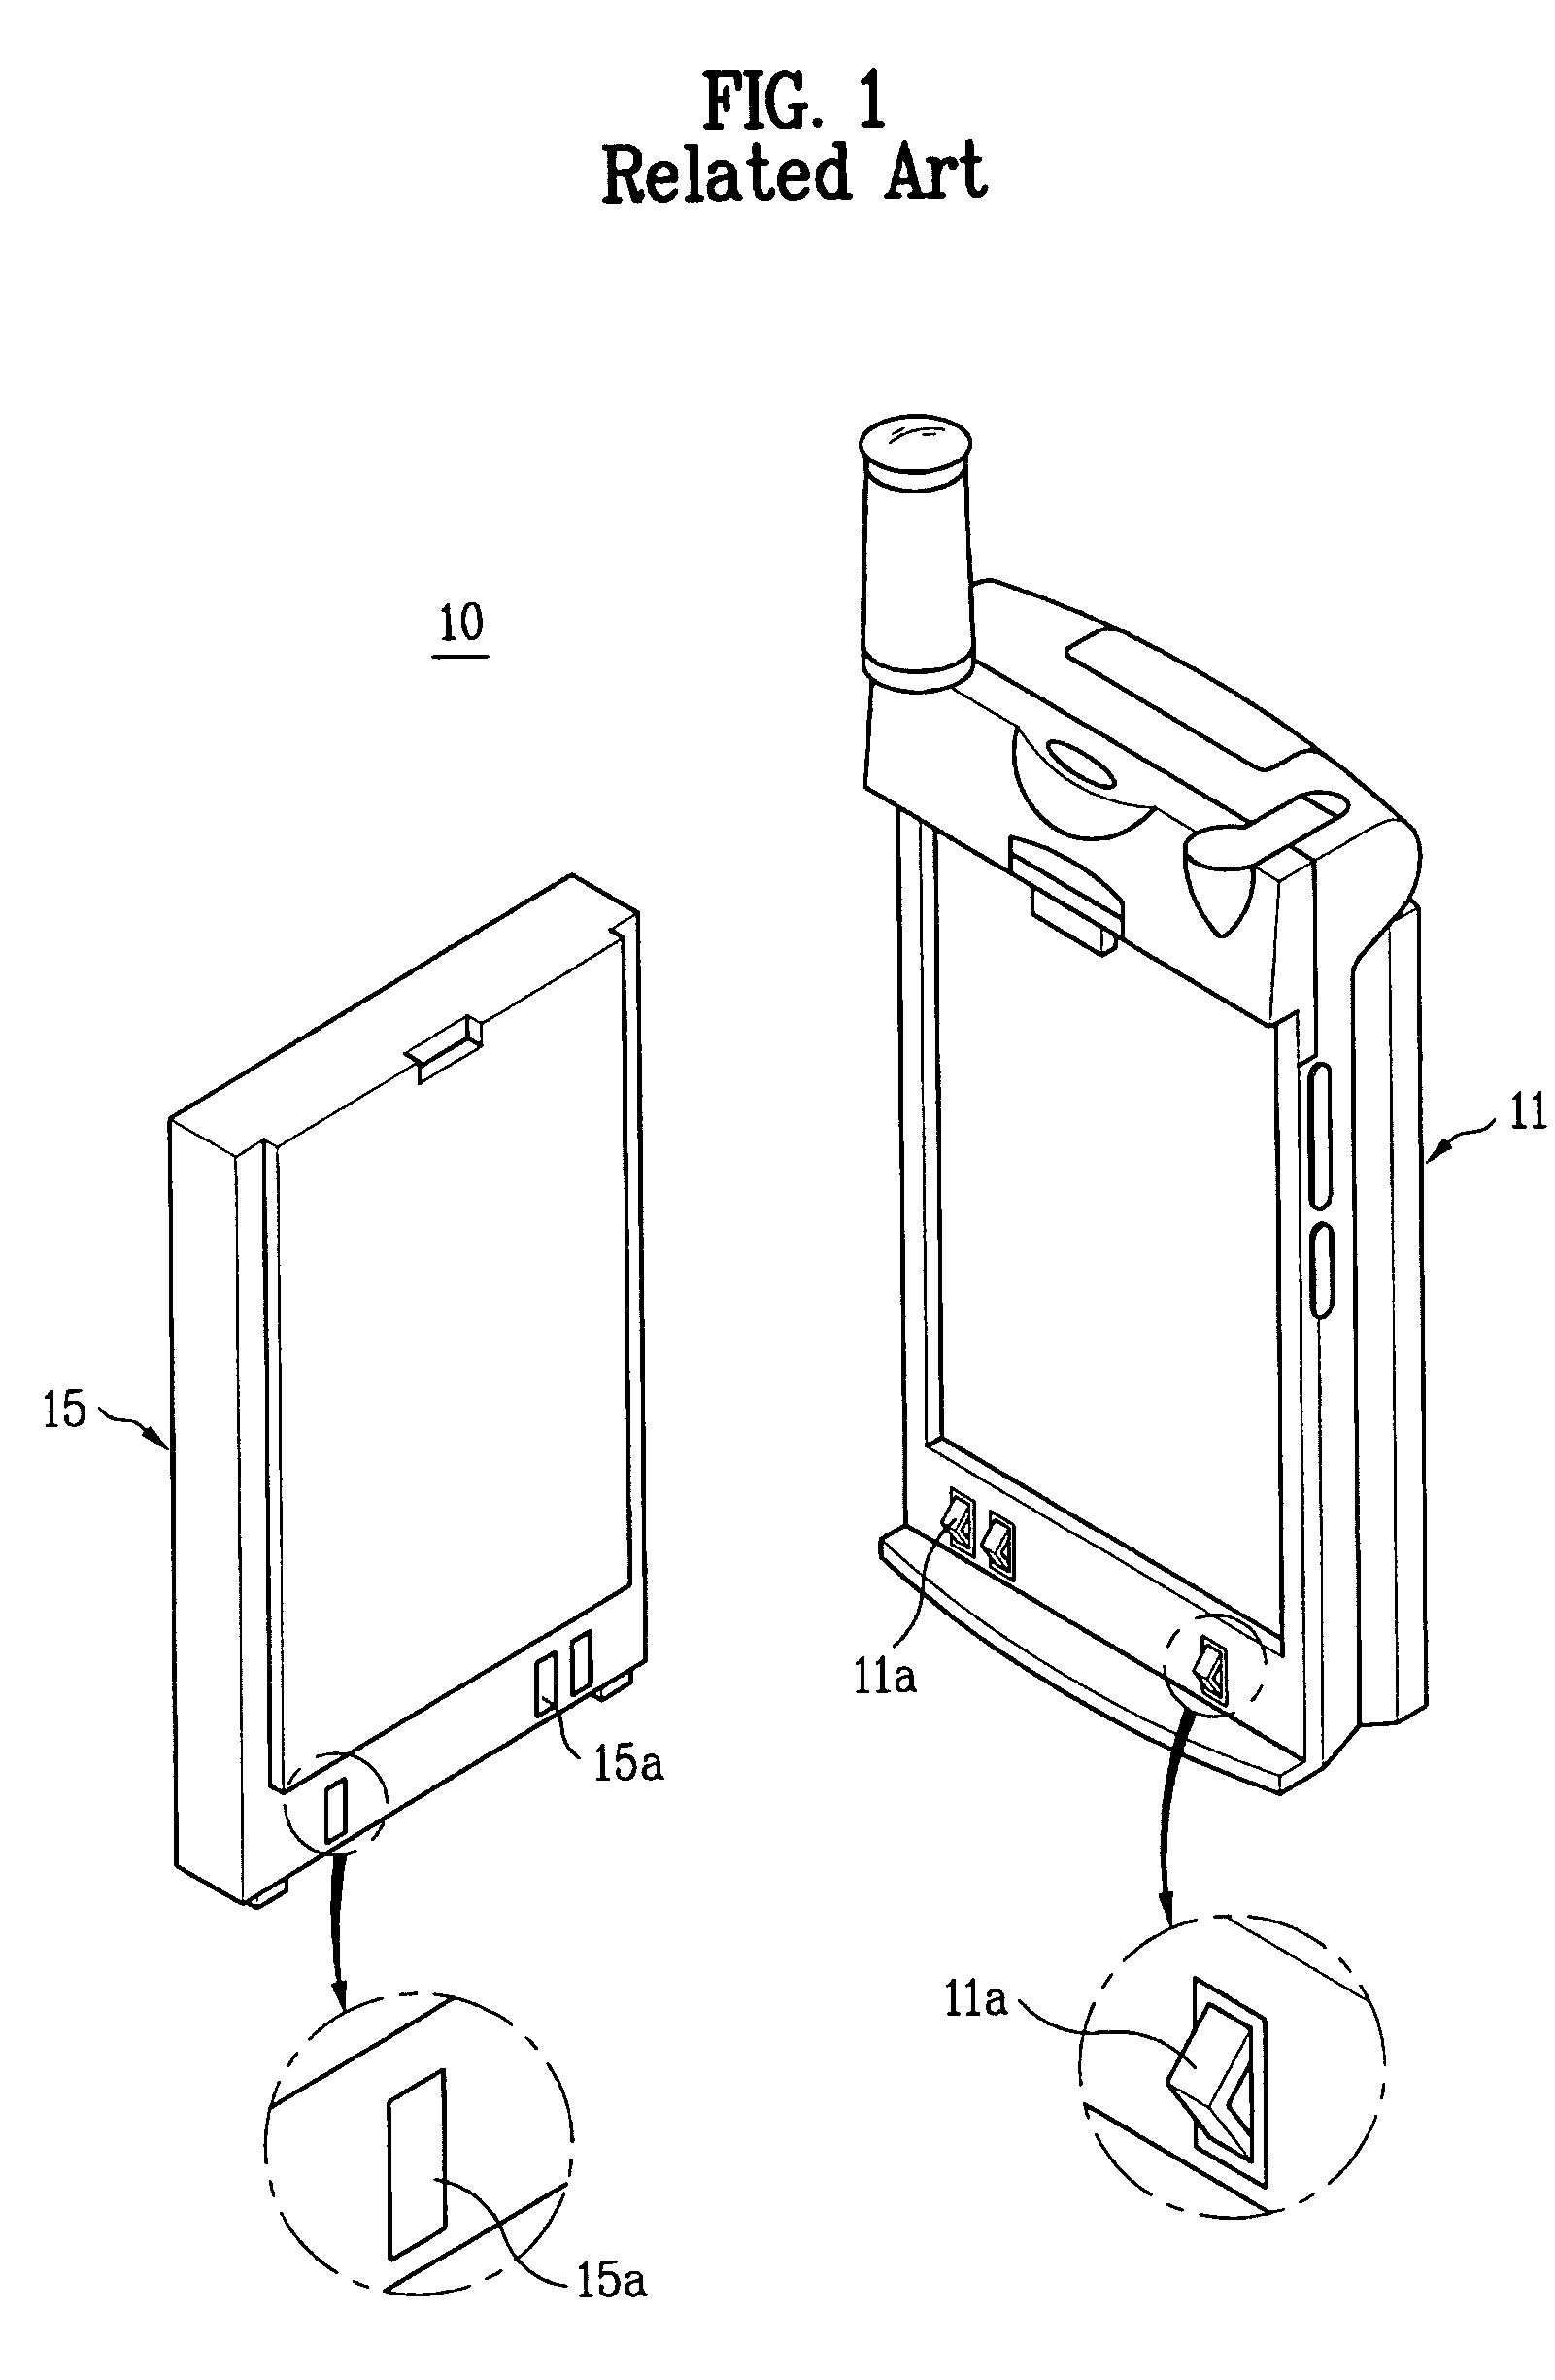 Contact for a portable electronic device